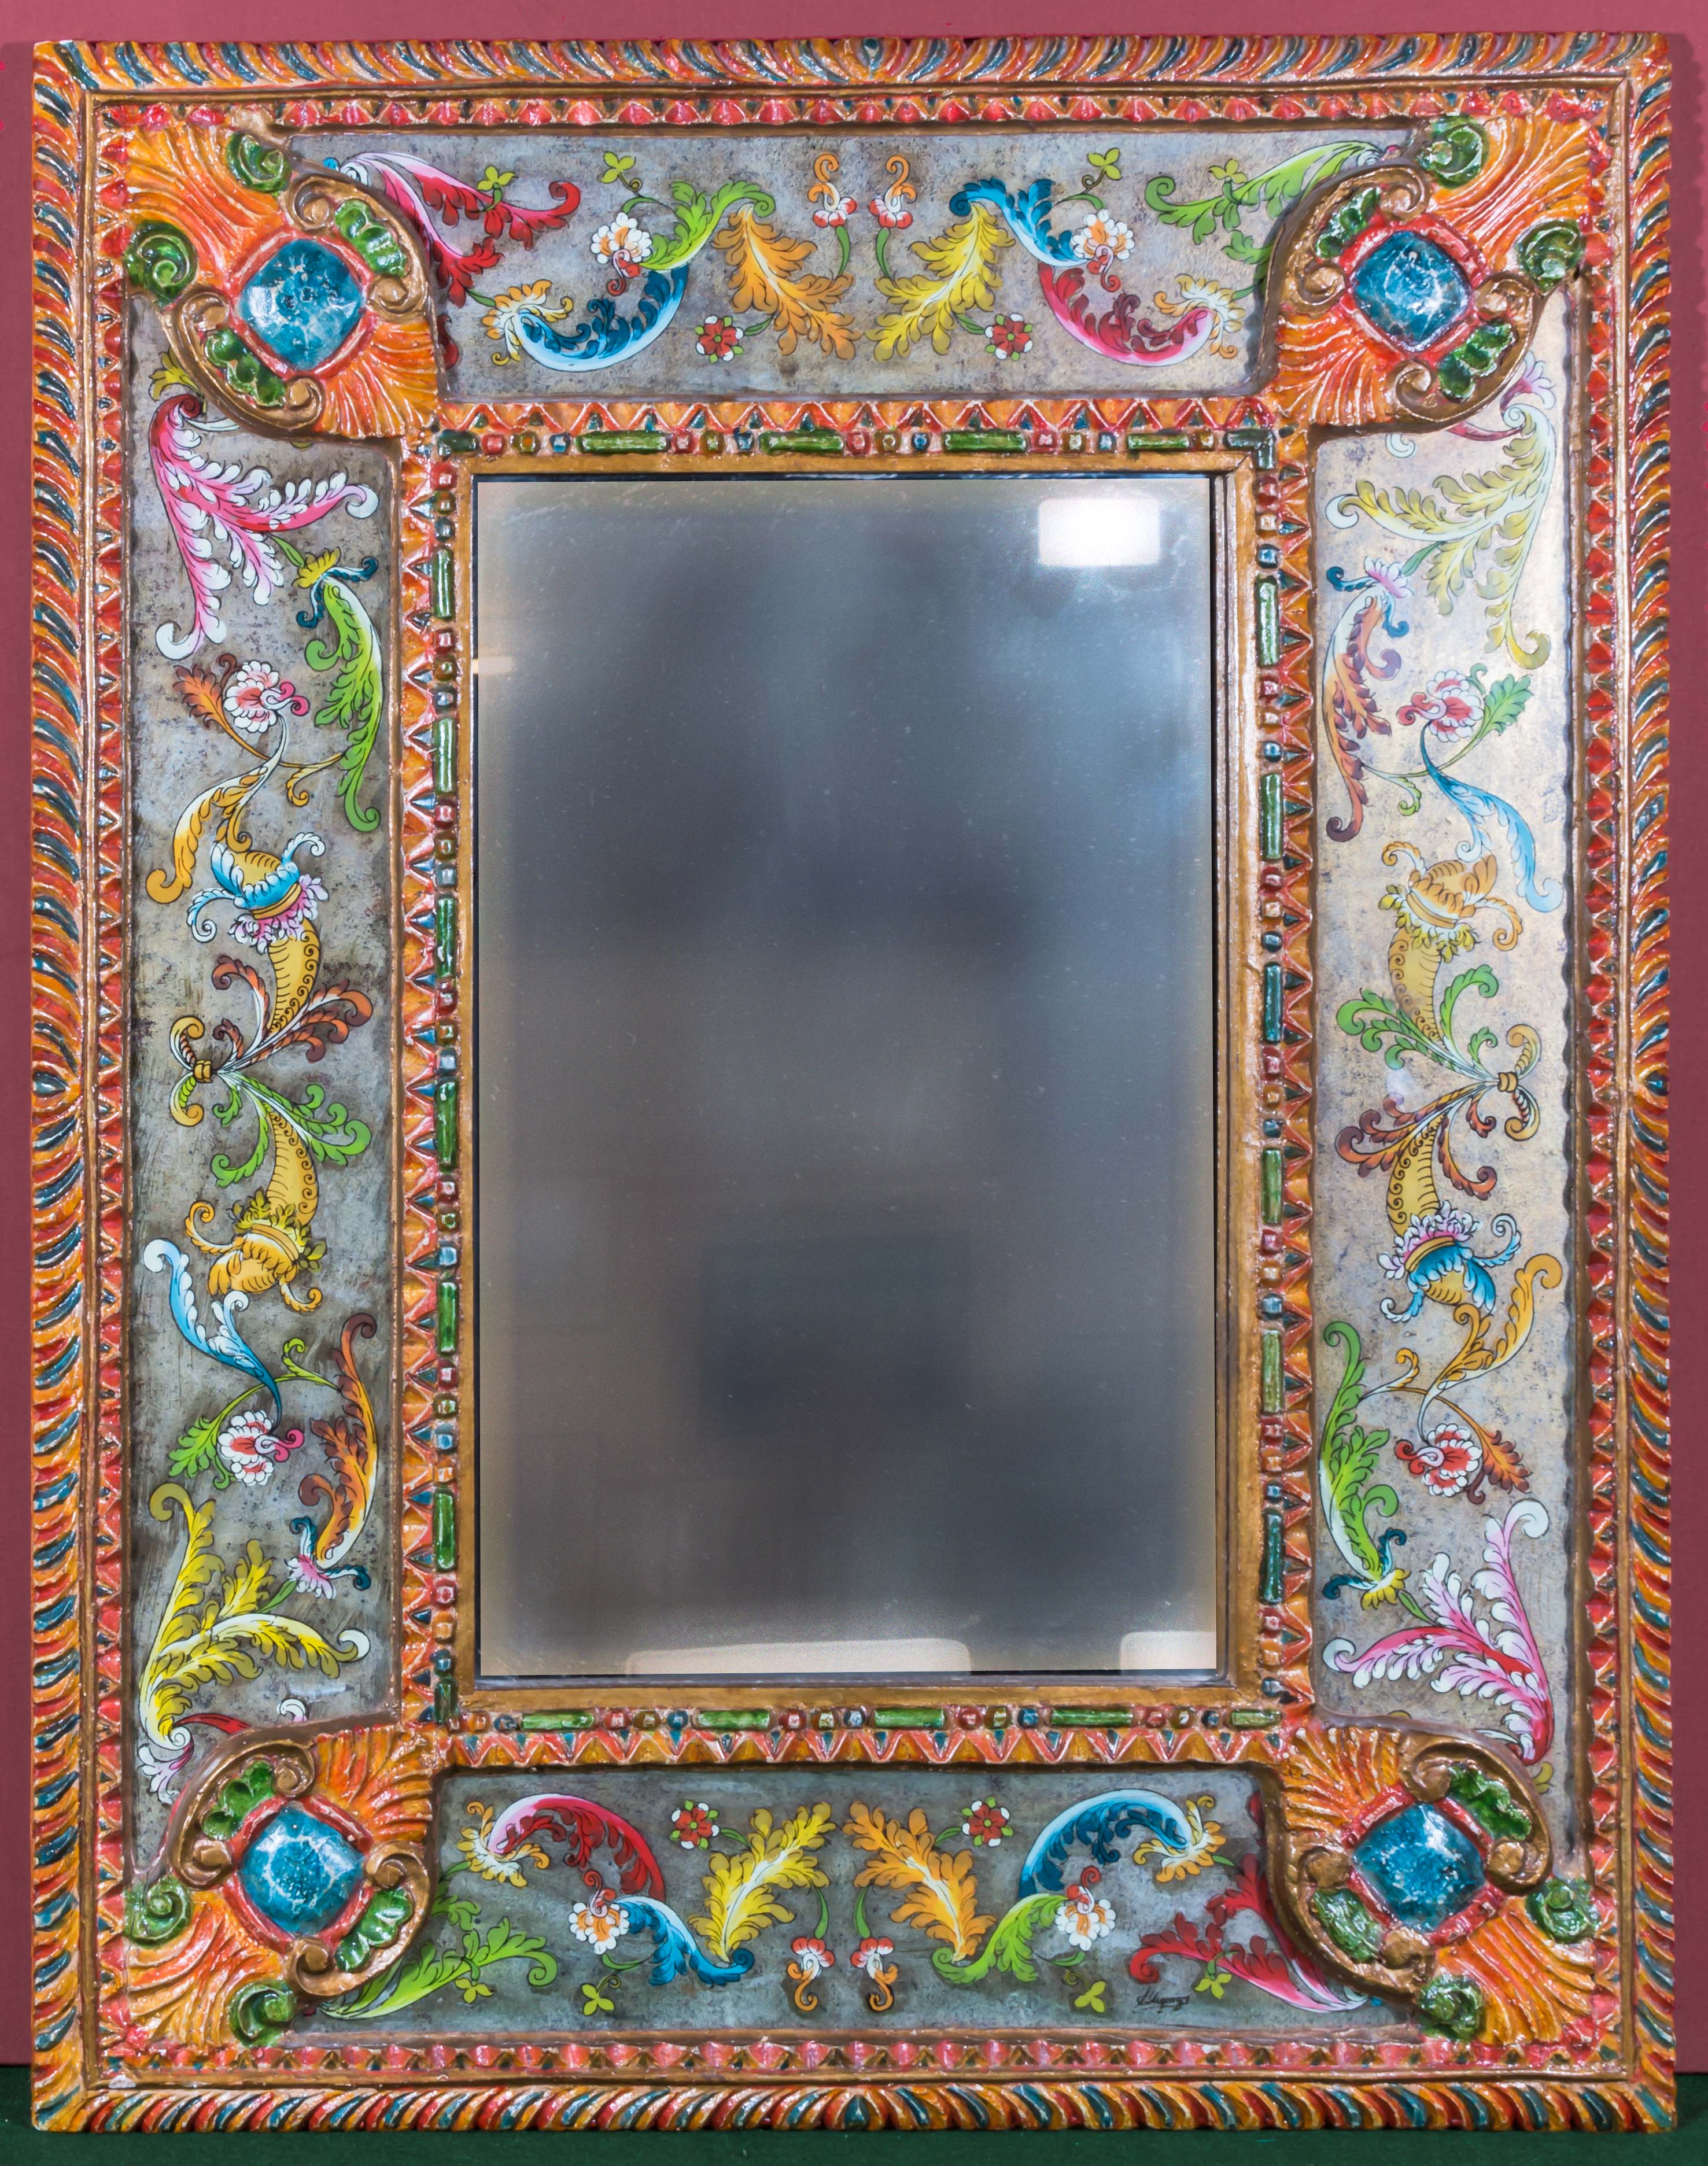 A mirror with decorative hand painted Mexican surround